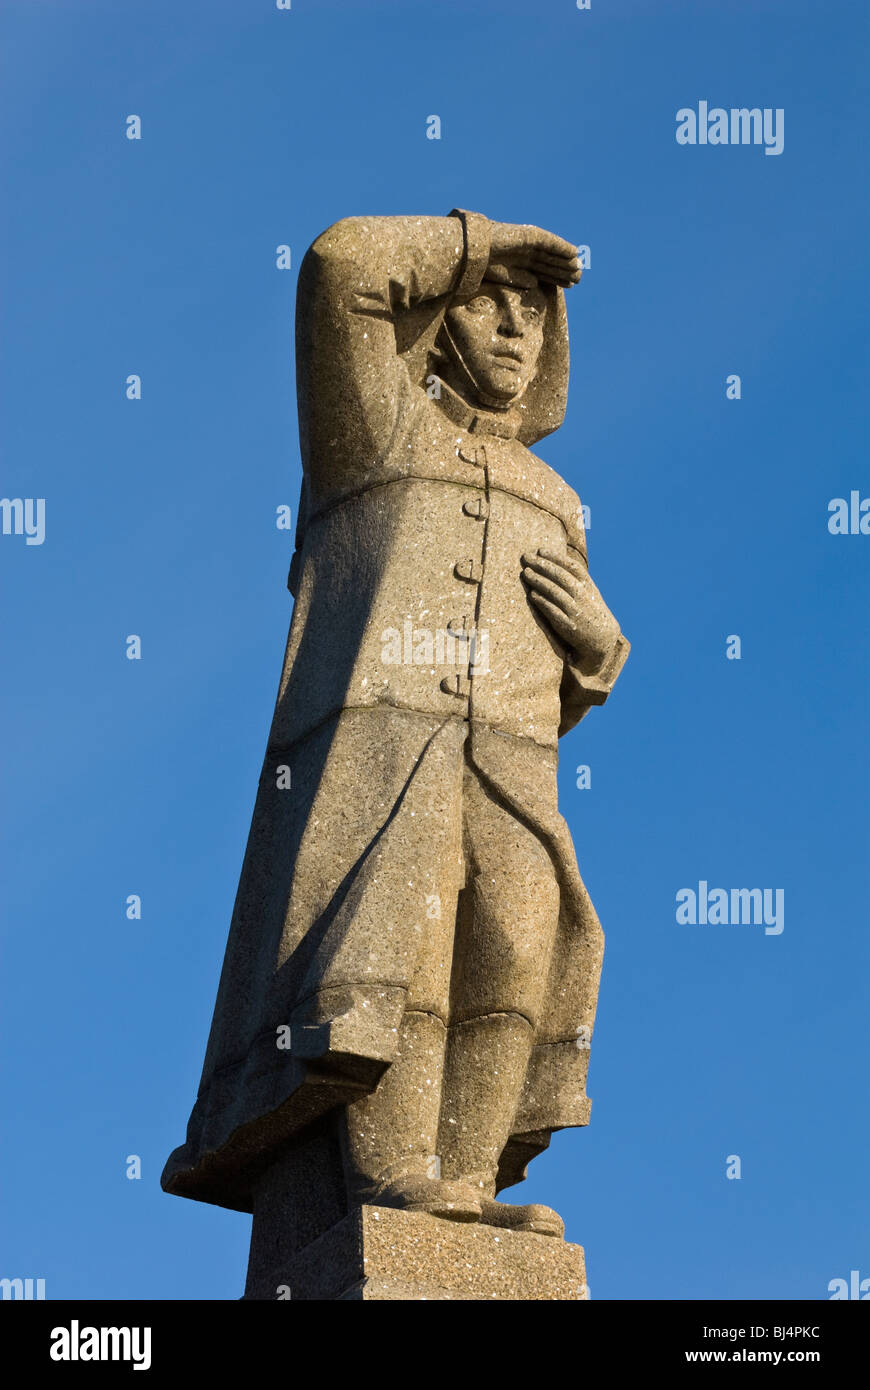 Monument to merchant sailors who died during WWII, Amsterdam, the Netherlands Stock Photo